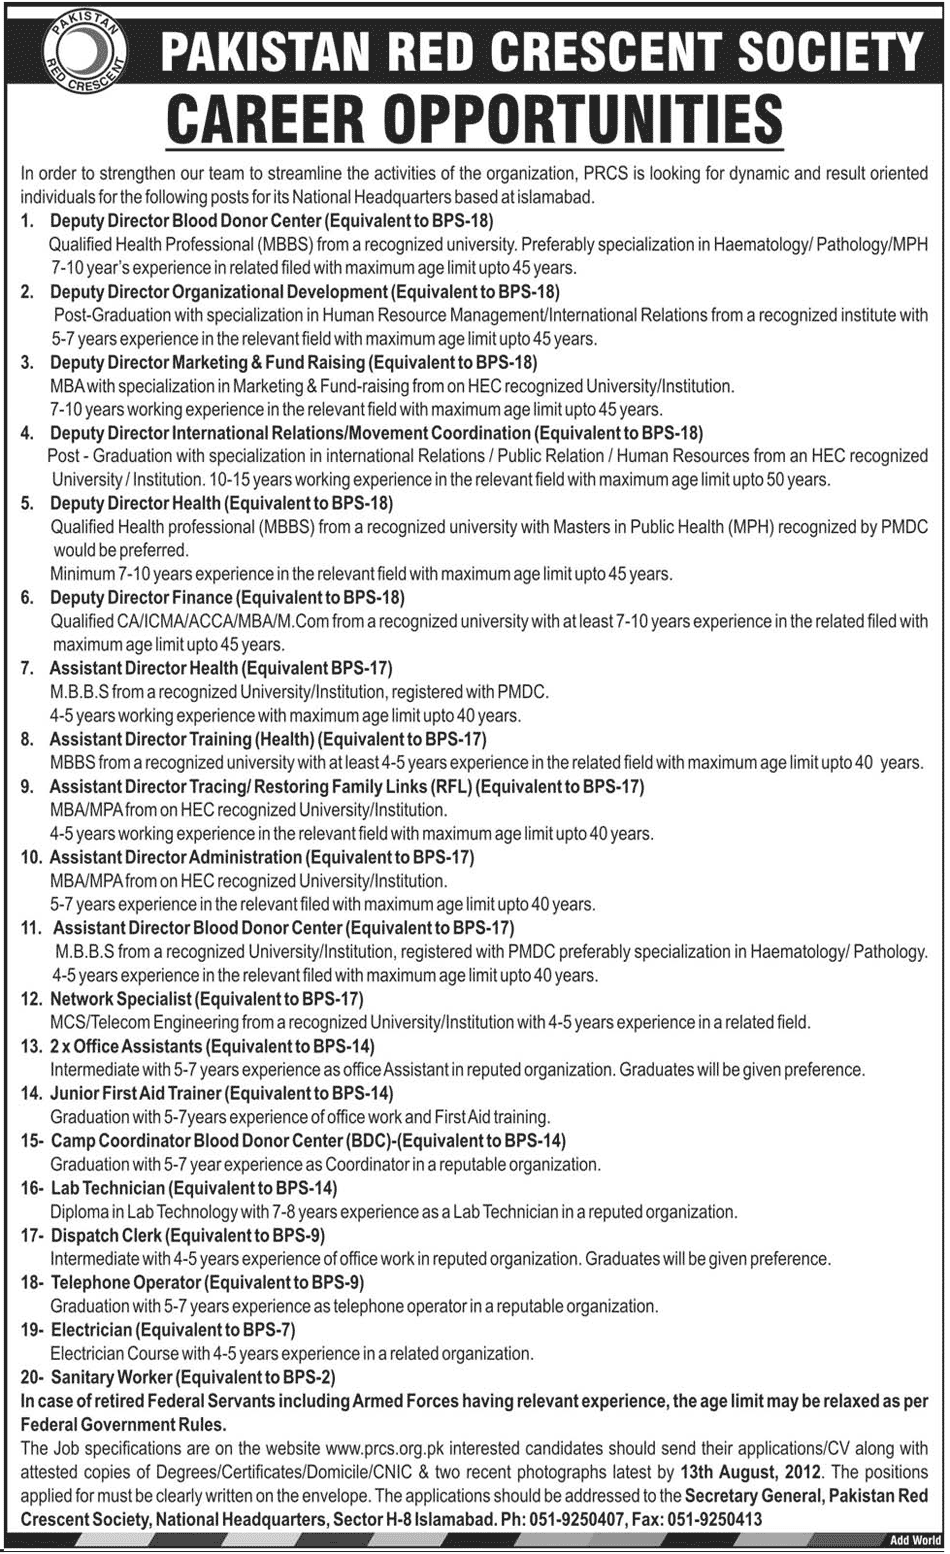 Jobs at Pakistan Red Crescent Scociety (PRCS)